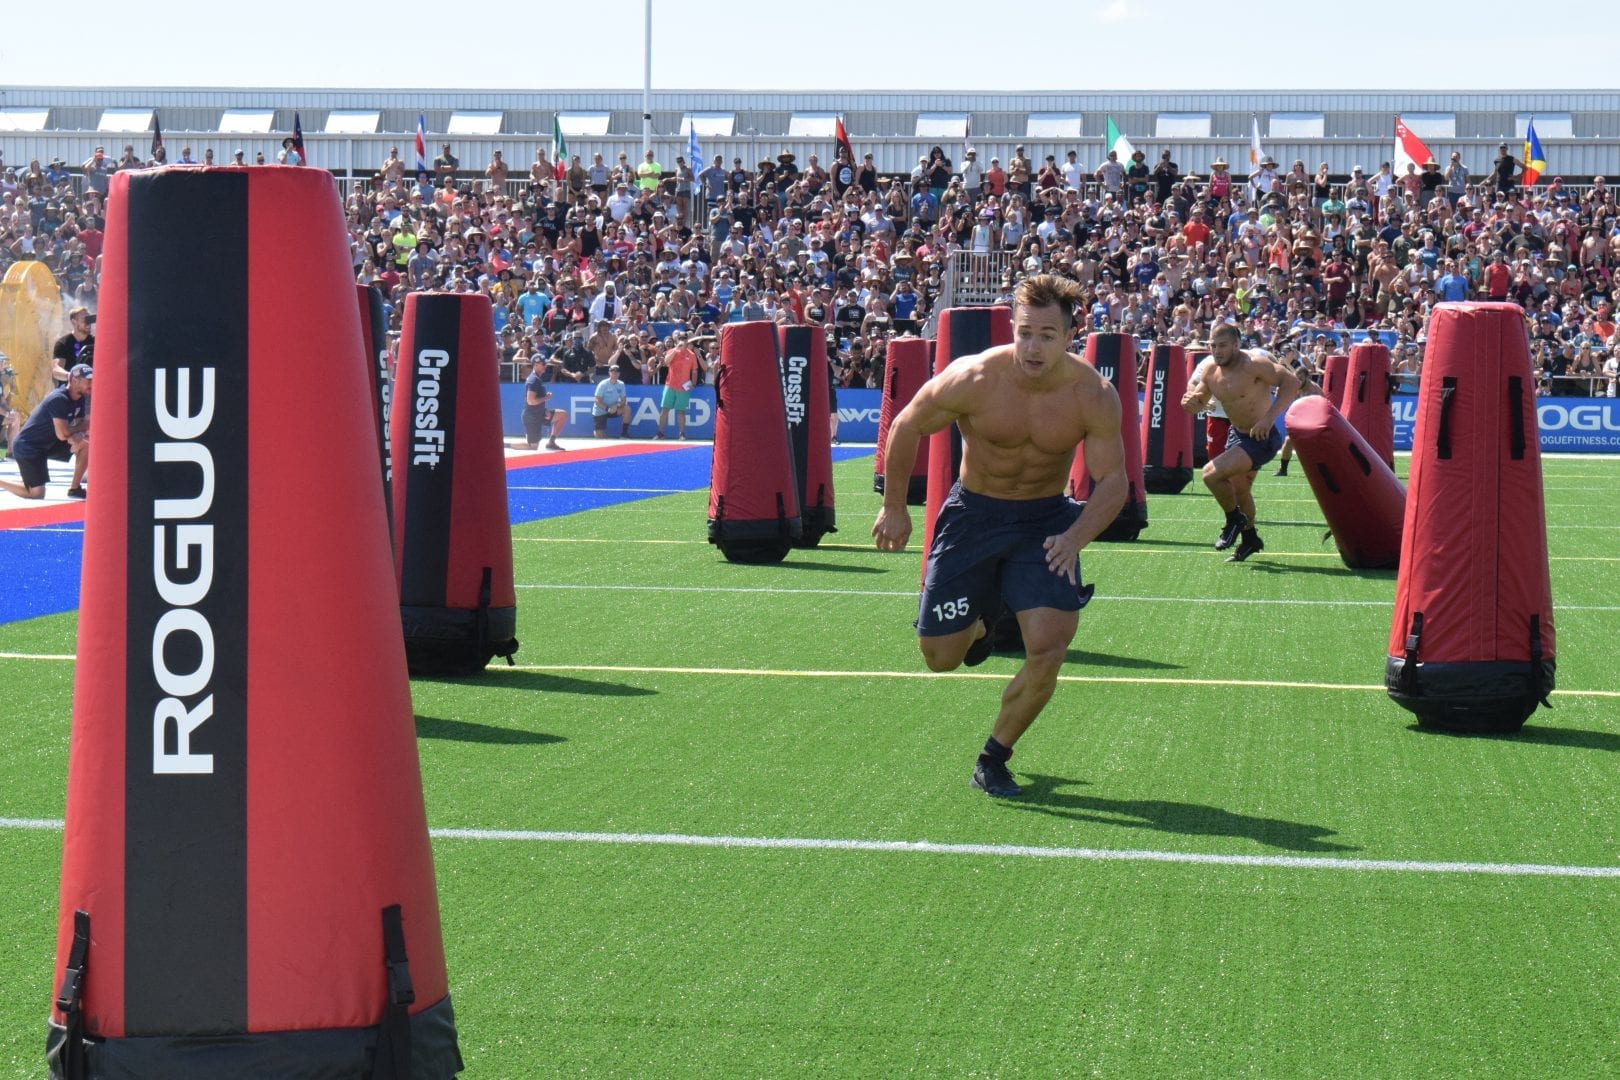 Adrian Mundwiler completes the Sprint event at the 2019 CrossFit Games.